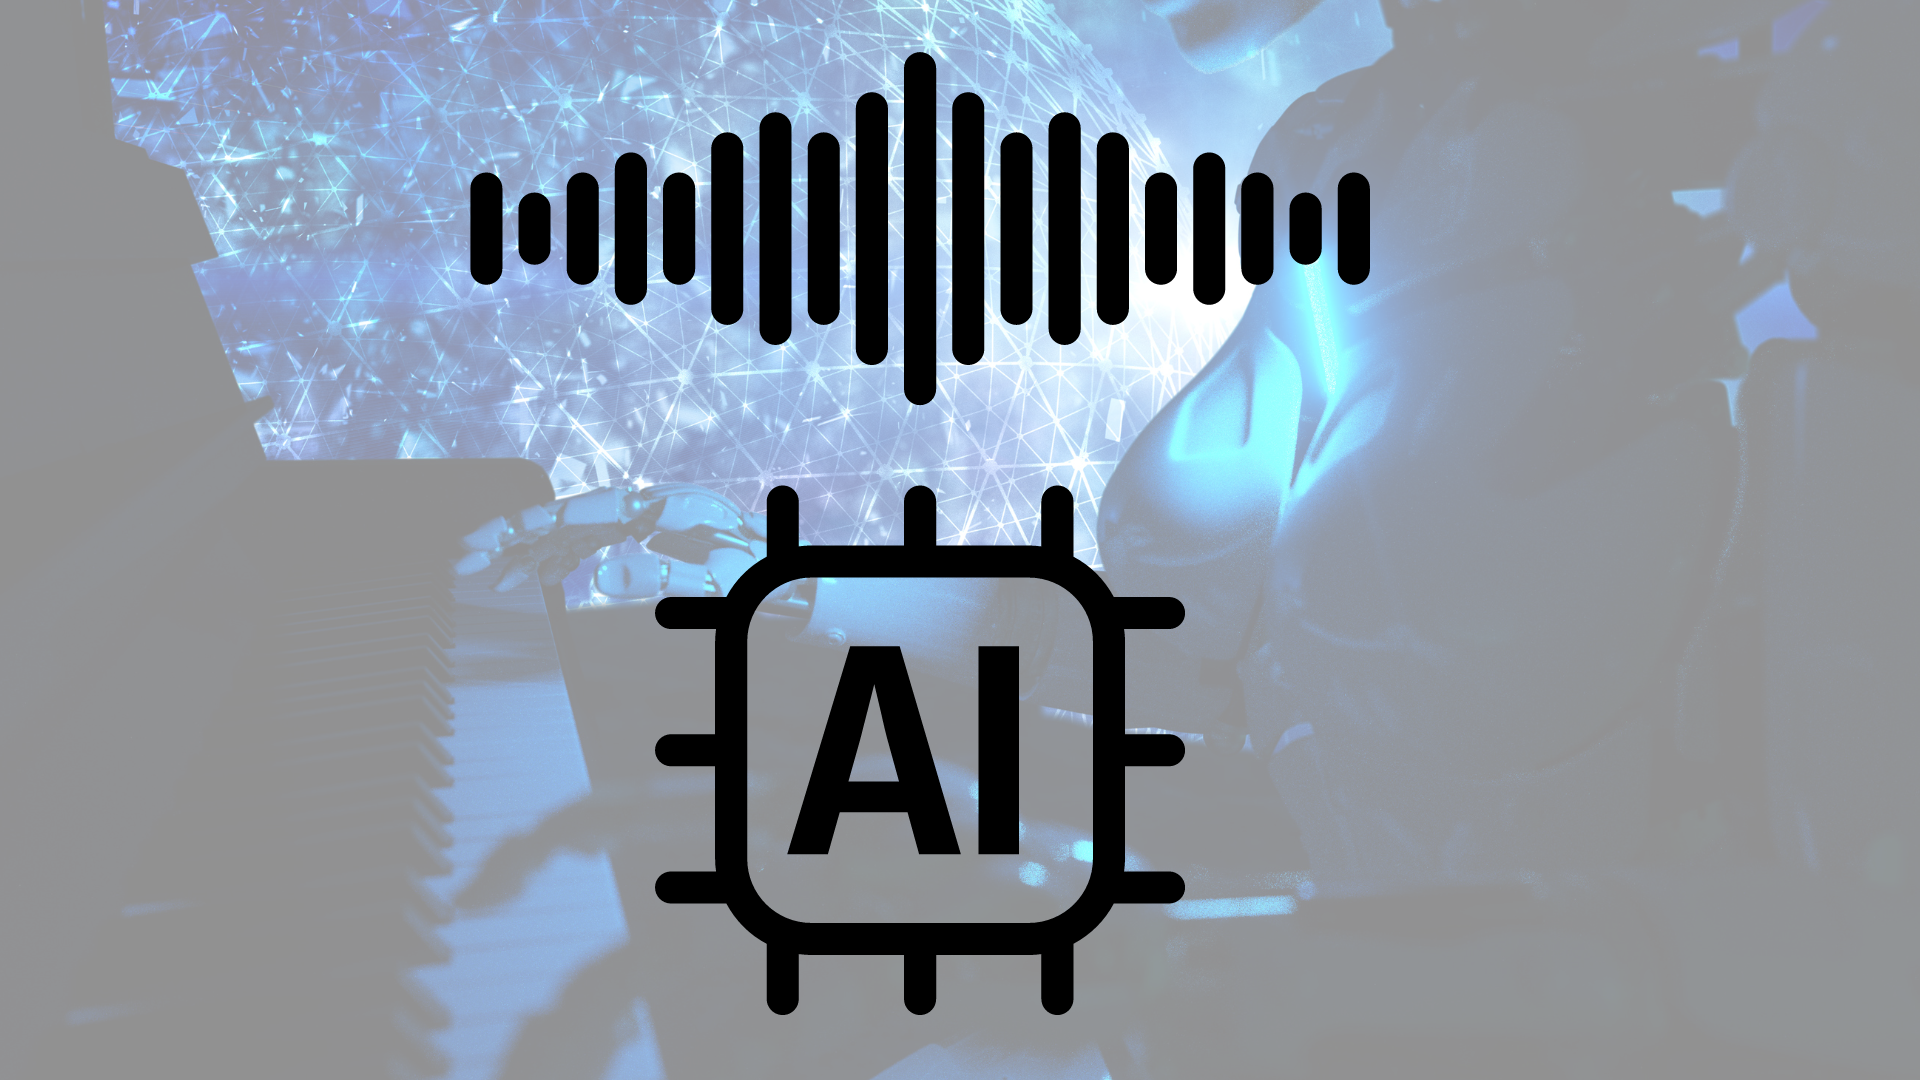 SPECIAL FOCUS: If music is solely created by AI, will new music ever be created?